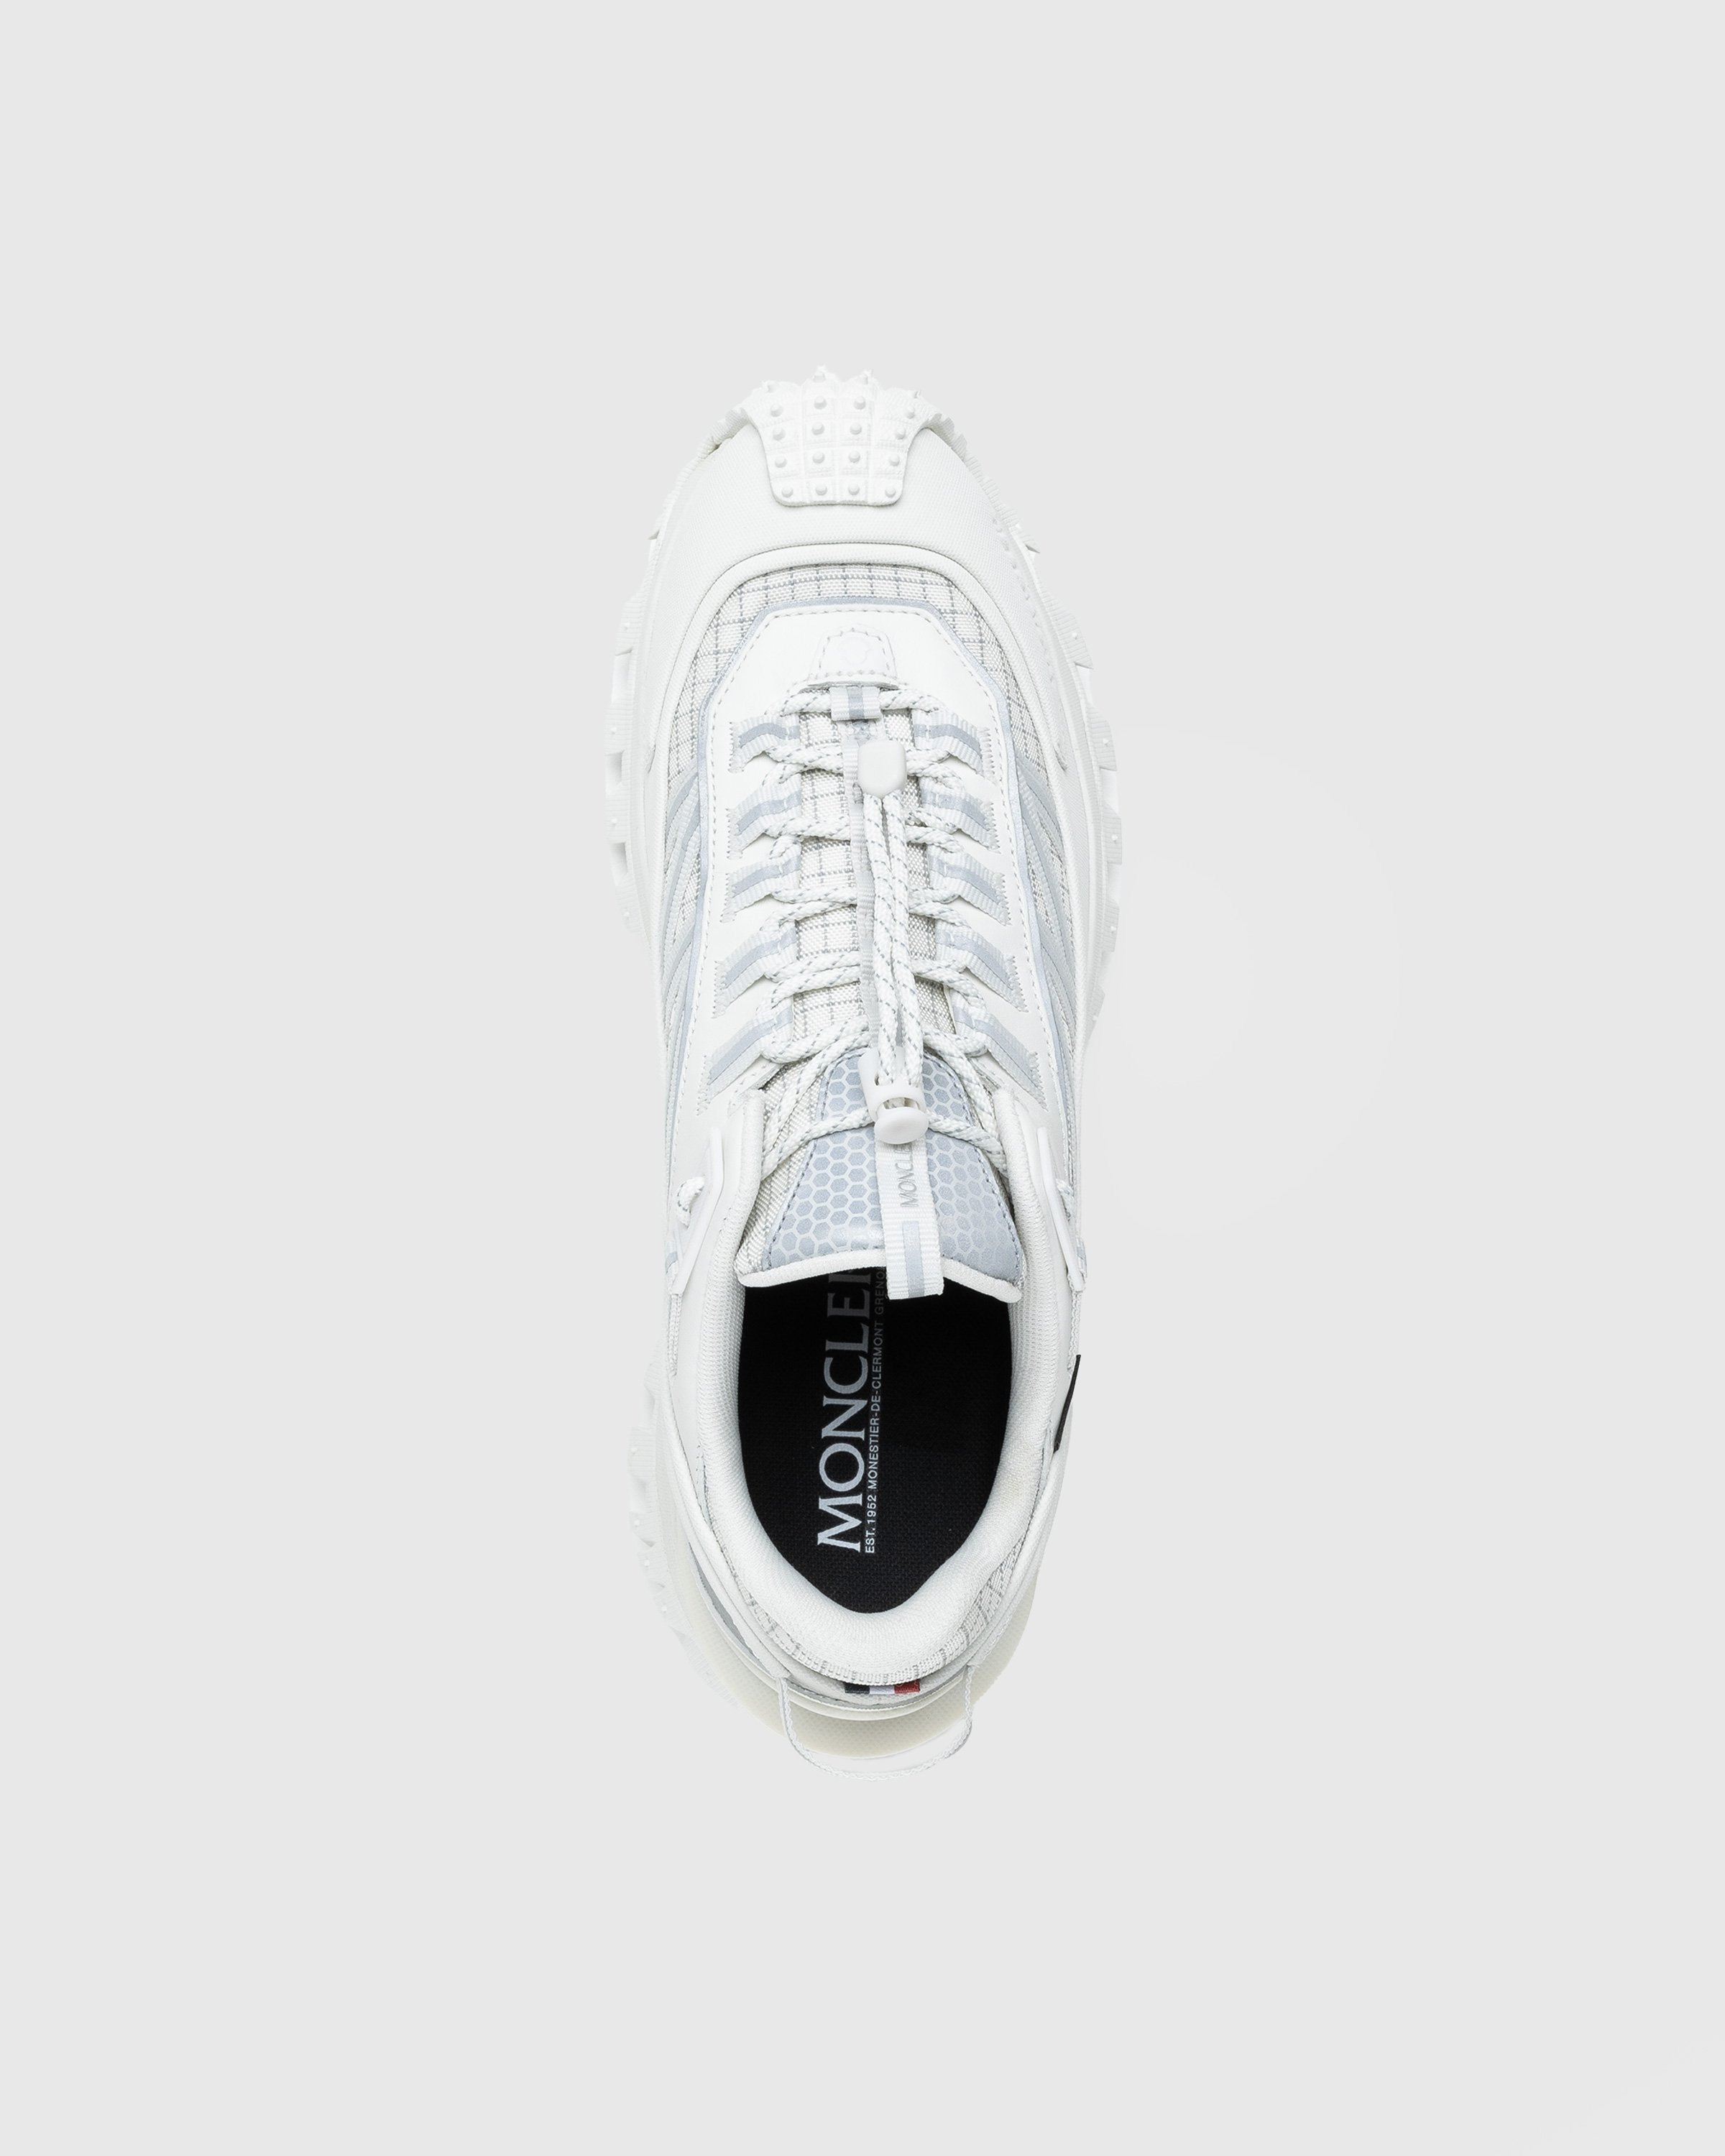 Moncler - Trailgrip Gtx Low Top Sneakers White - Footwear - White - Image 5